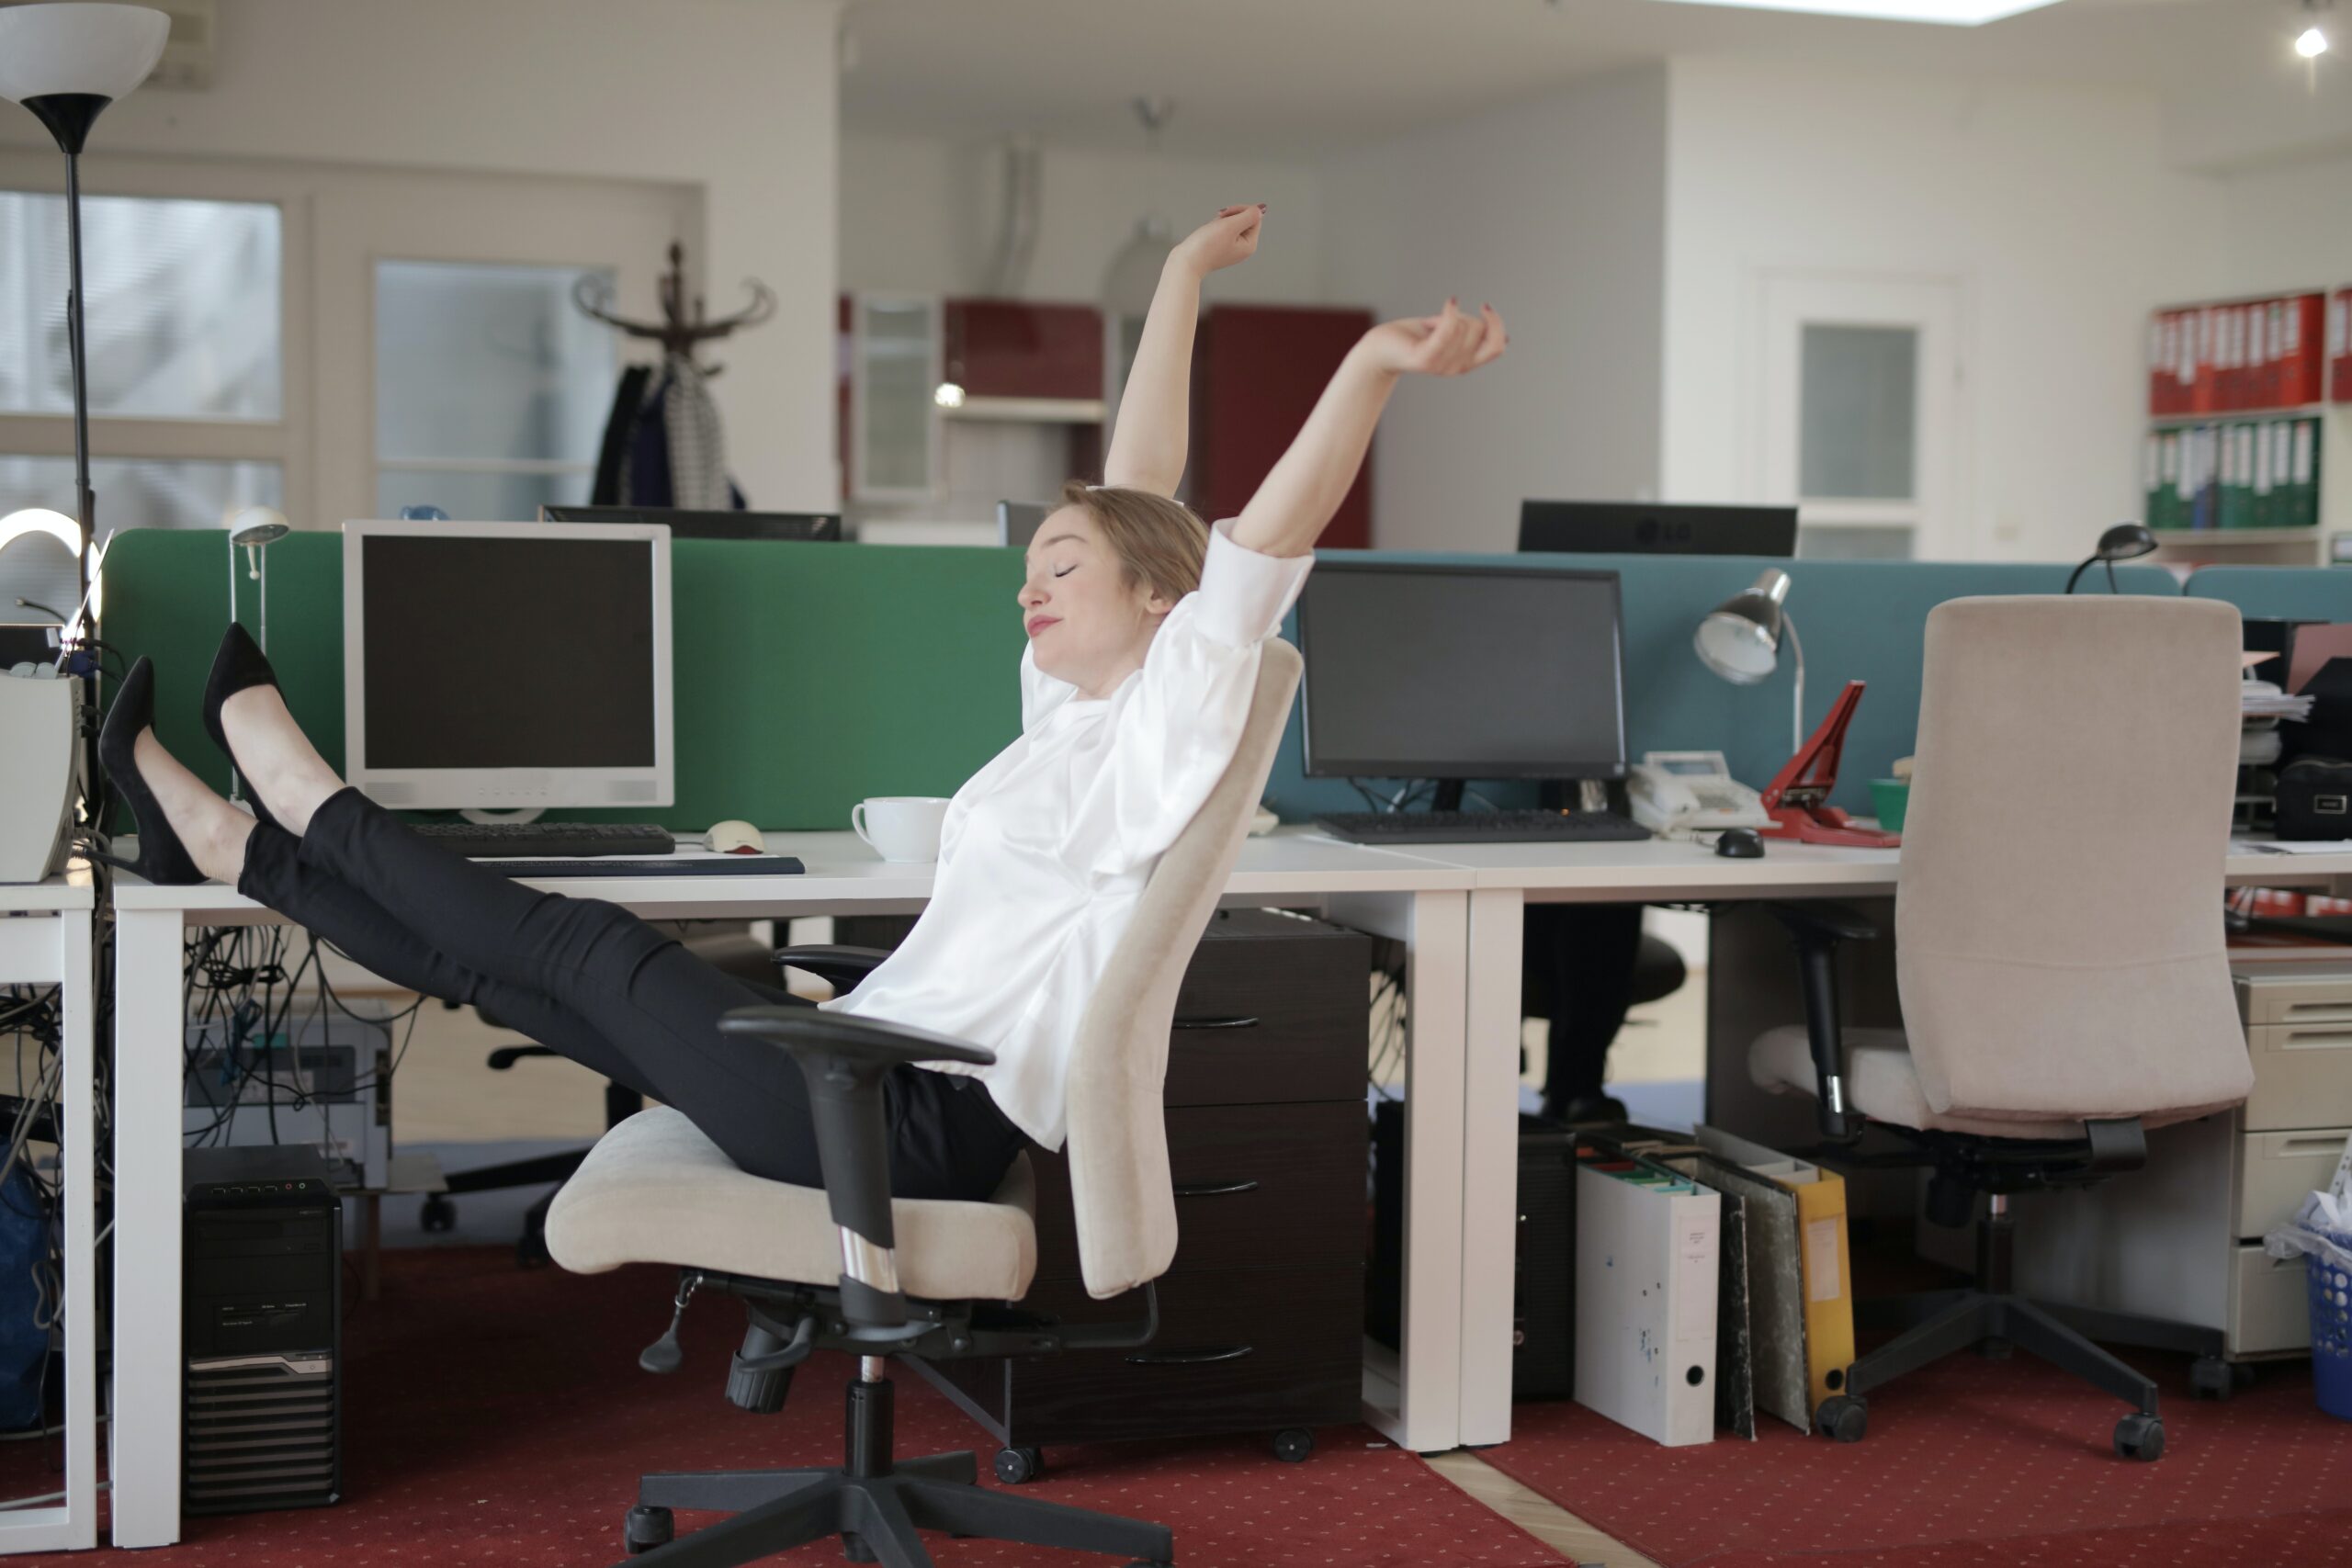 Co-worker is a slacker - woman sitting at desk with feet kicked up and yawn